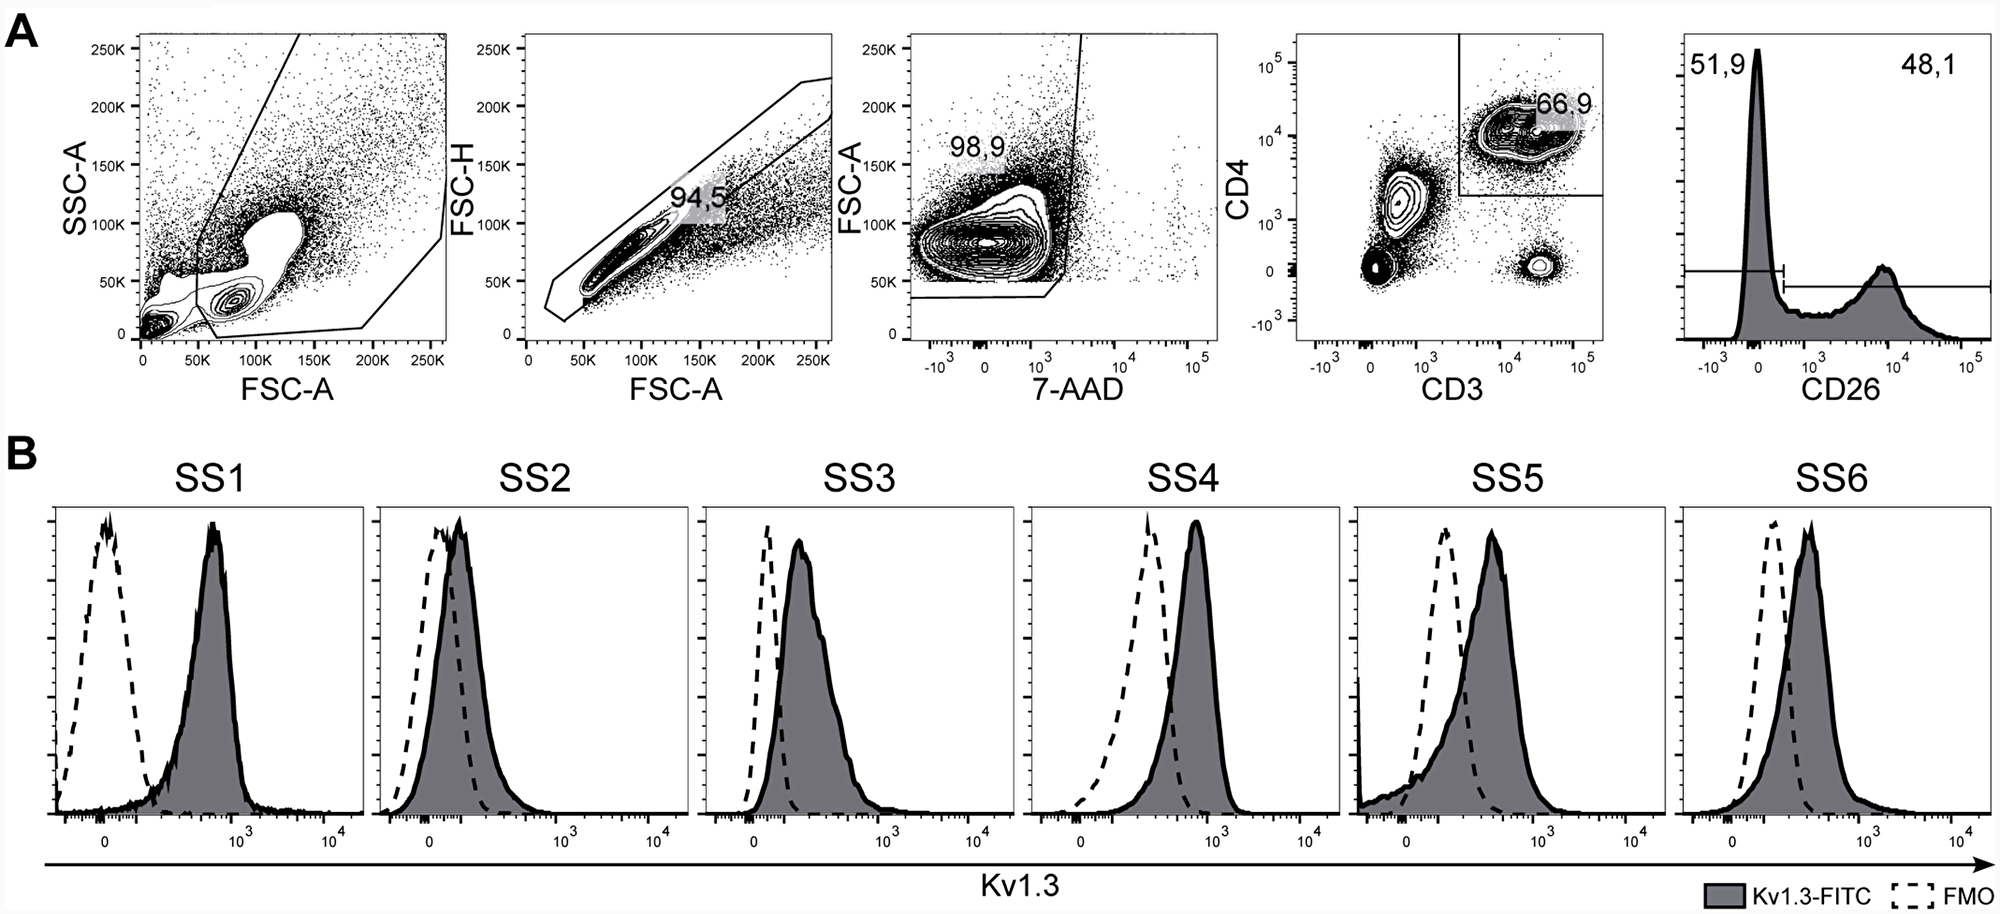 Kv1.3 is expressed in malignant cells from SS patients.